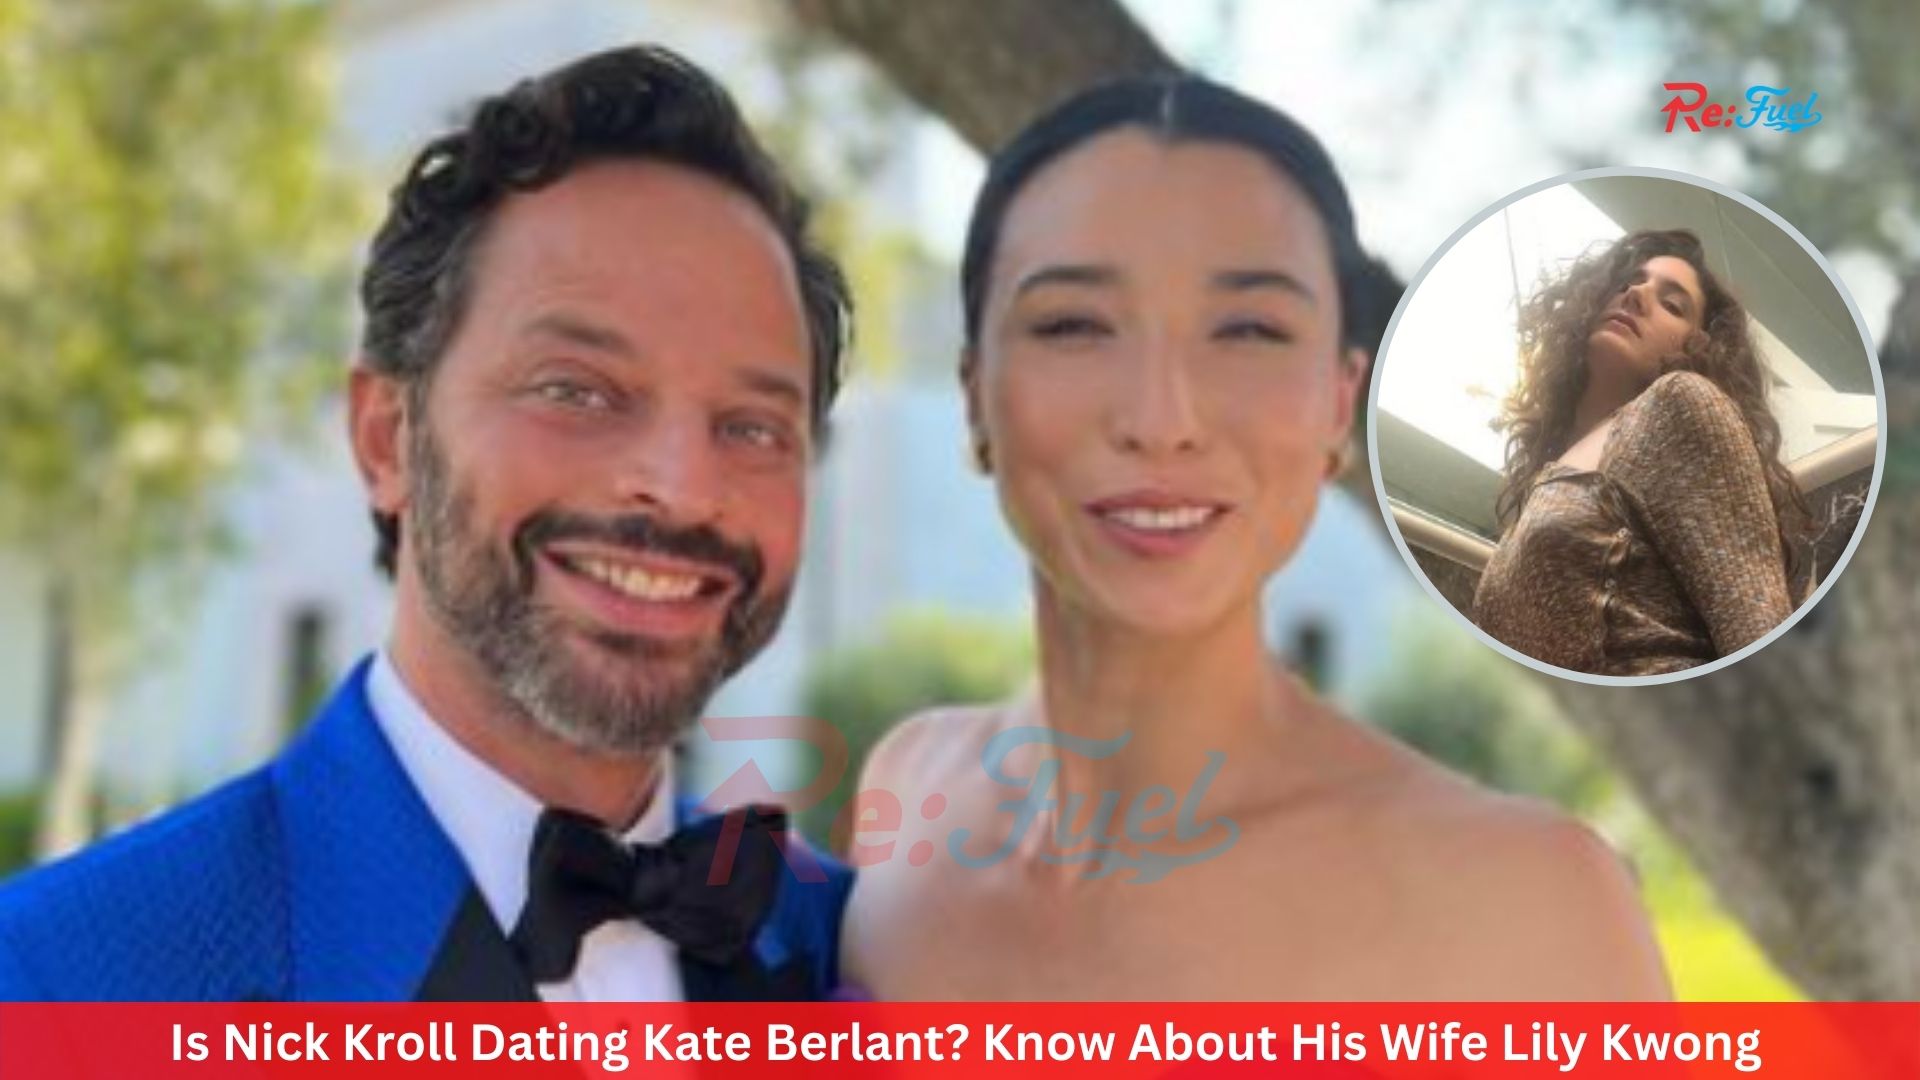 Is Nick Kroll Dating Kate Berlant? Know About His Wife Lily Kwong